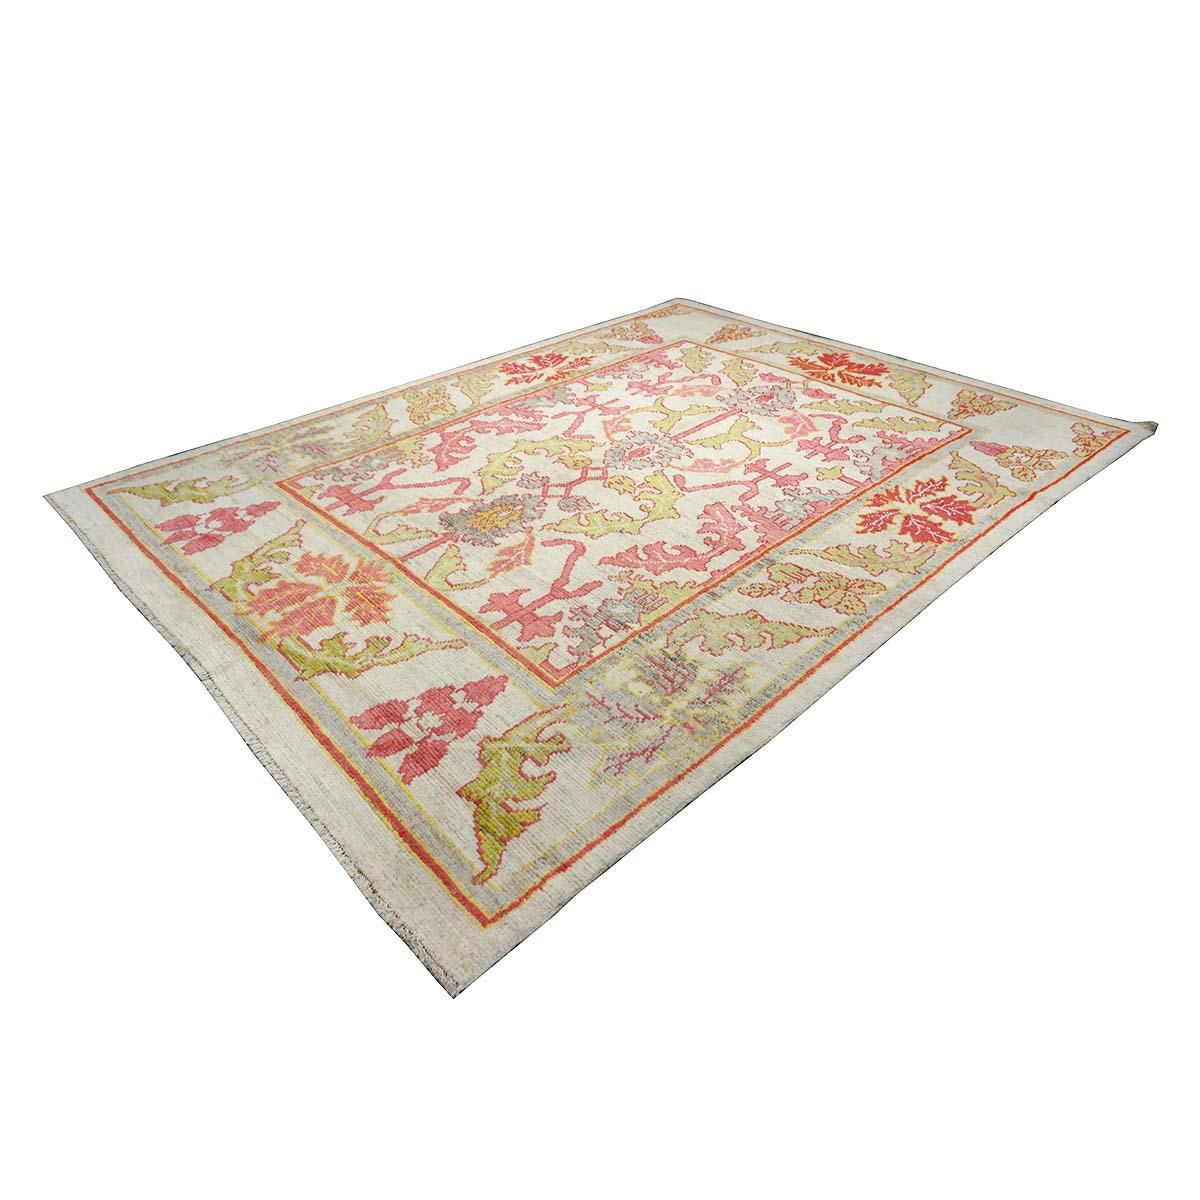 Hand-Woven 21st Century Persian Oushak Master 8x11 Ivory, Pink, & Yellow Handmade Area Rug For Sale